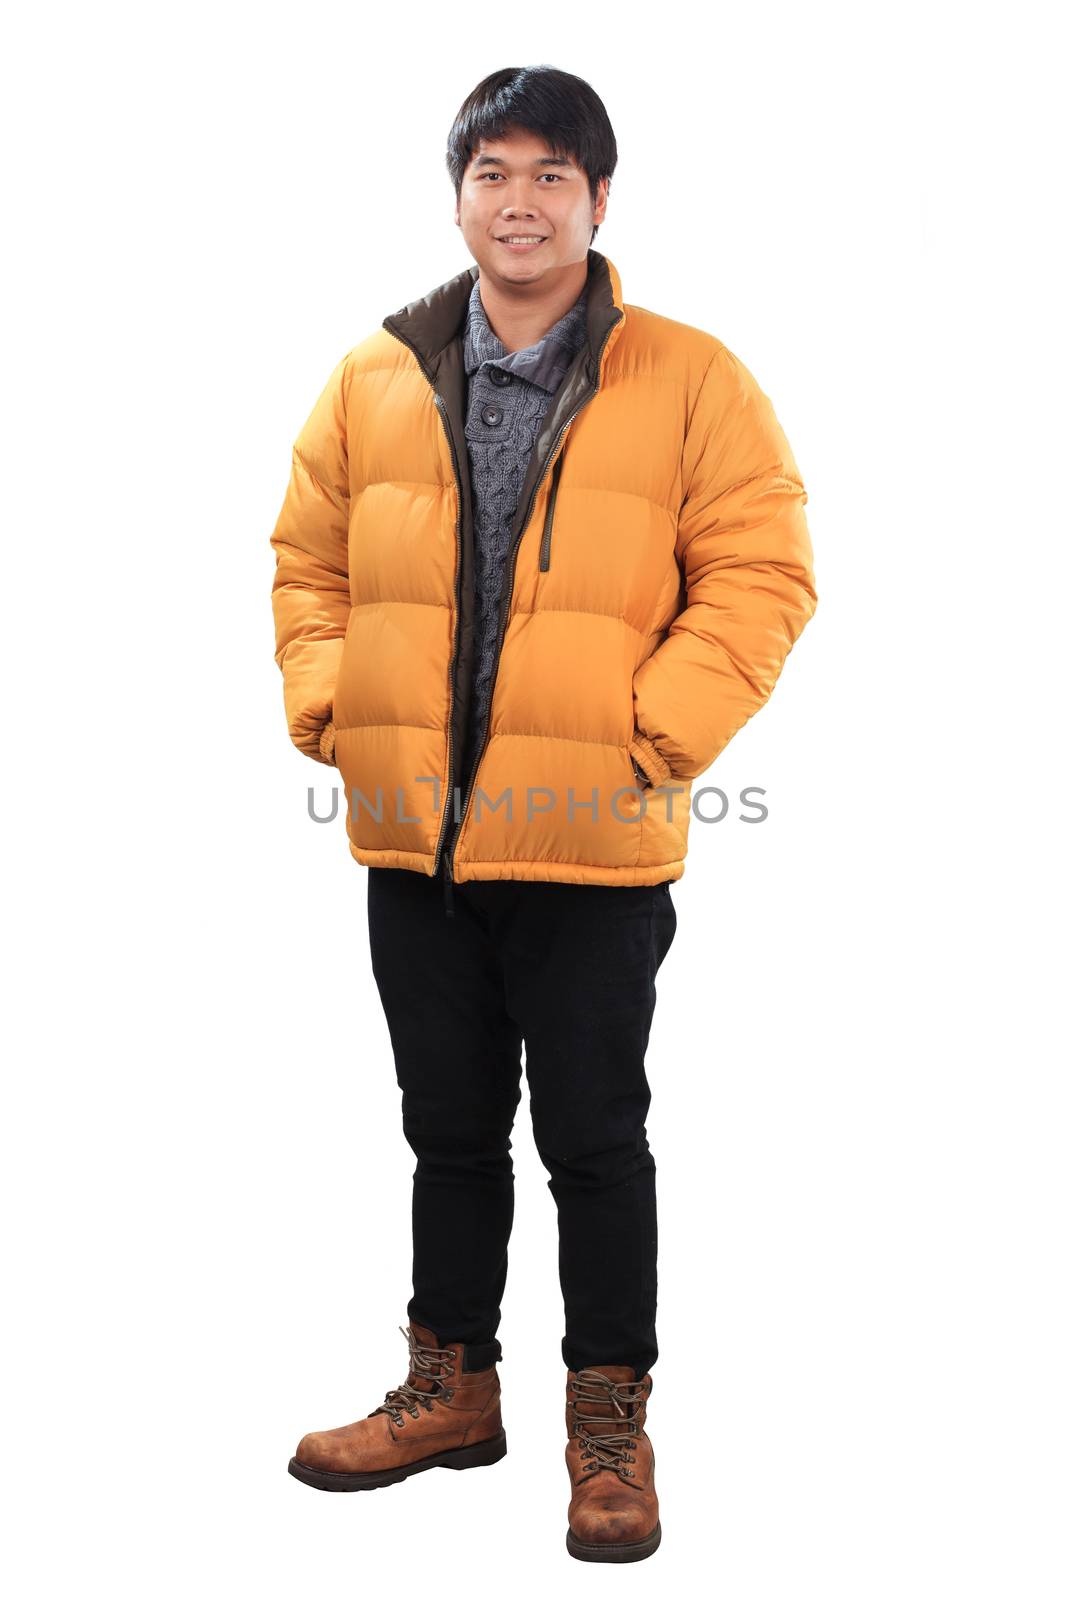 portrait of young asian man wearing yellow winter jacket and black jeans leather shoes standing with smiling face isolated white background